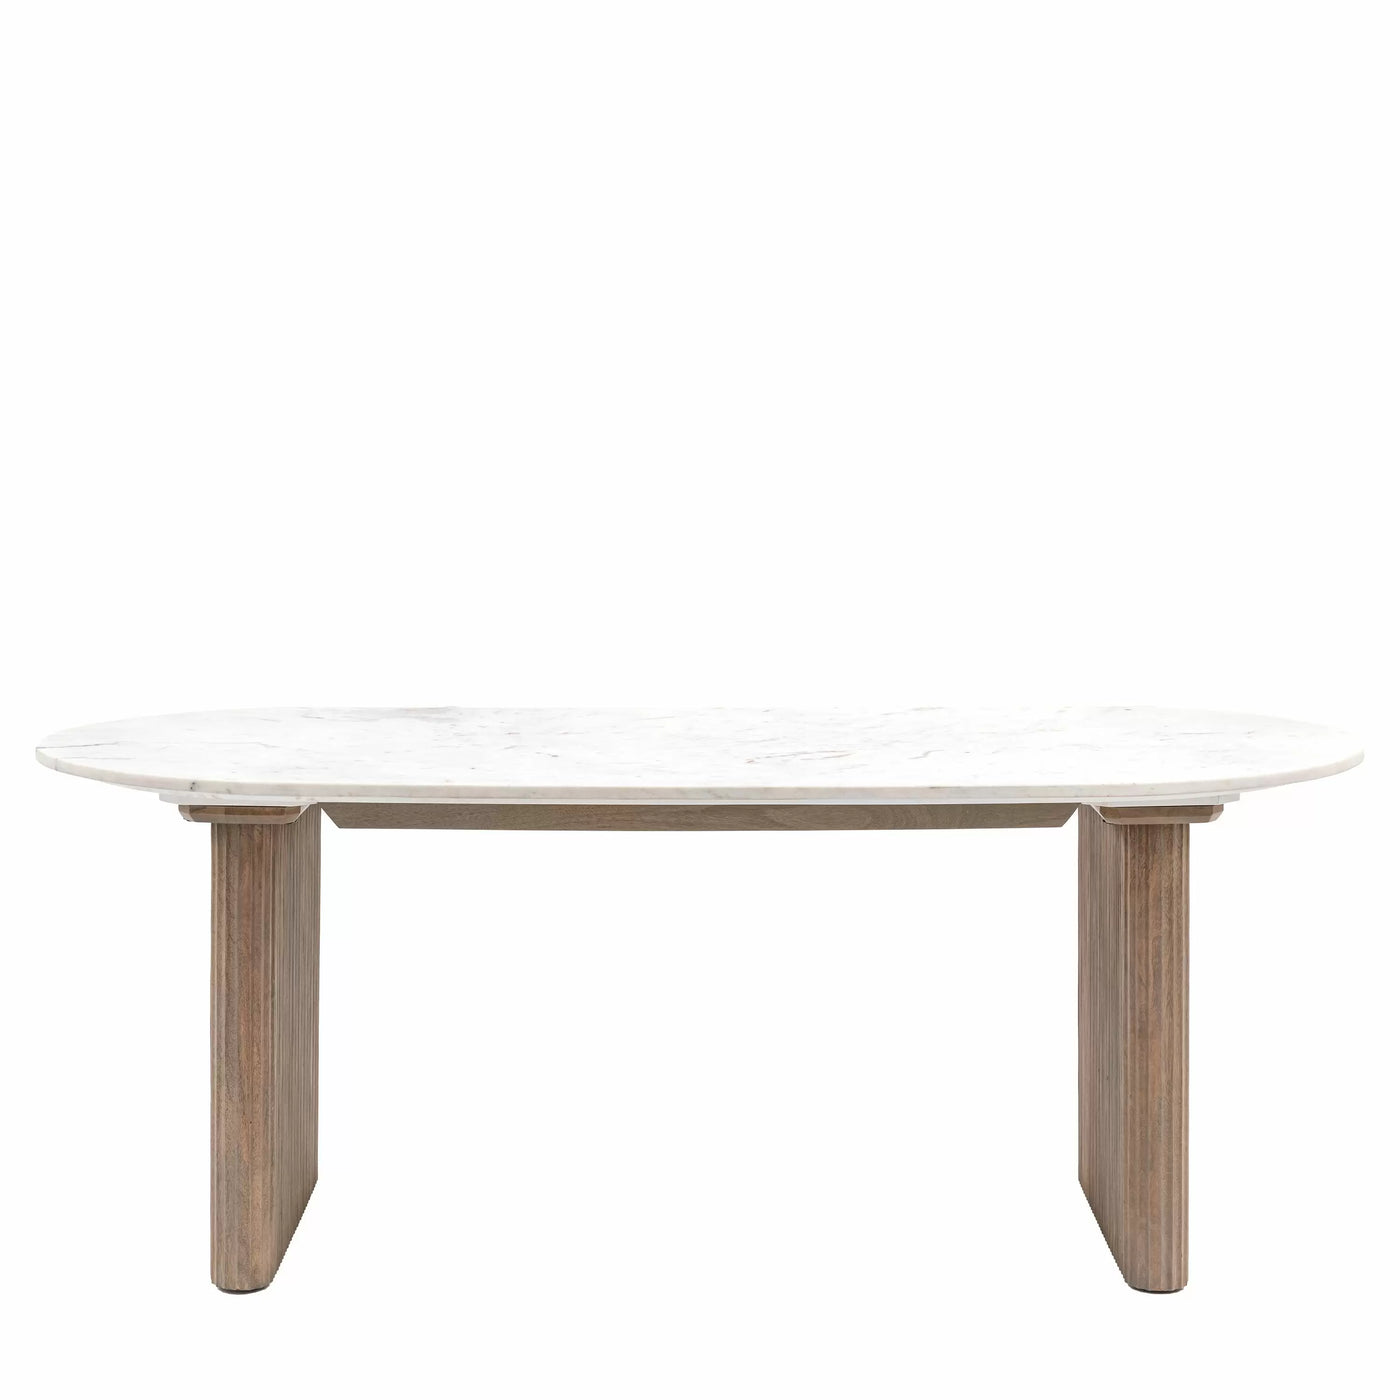 Wiltown Dining Table 2000x900x760mm